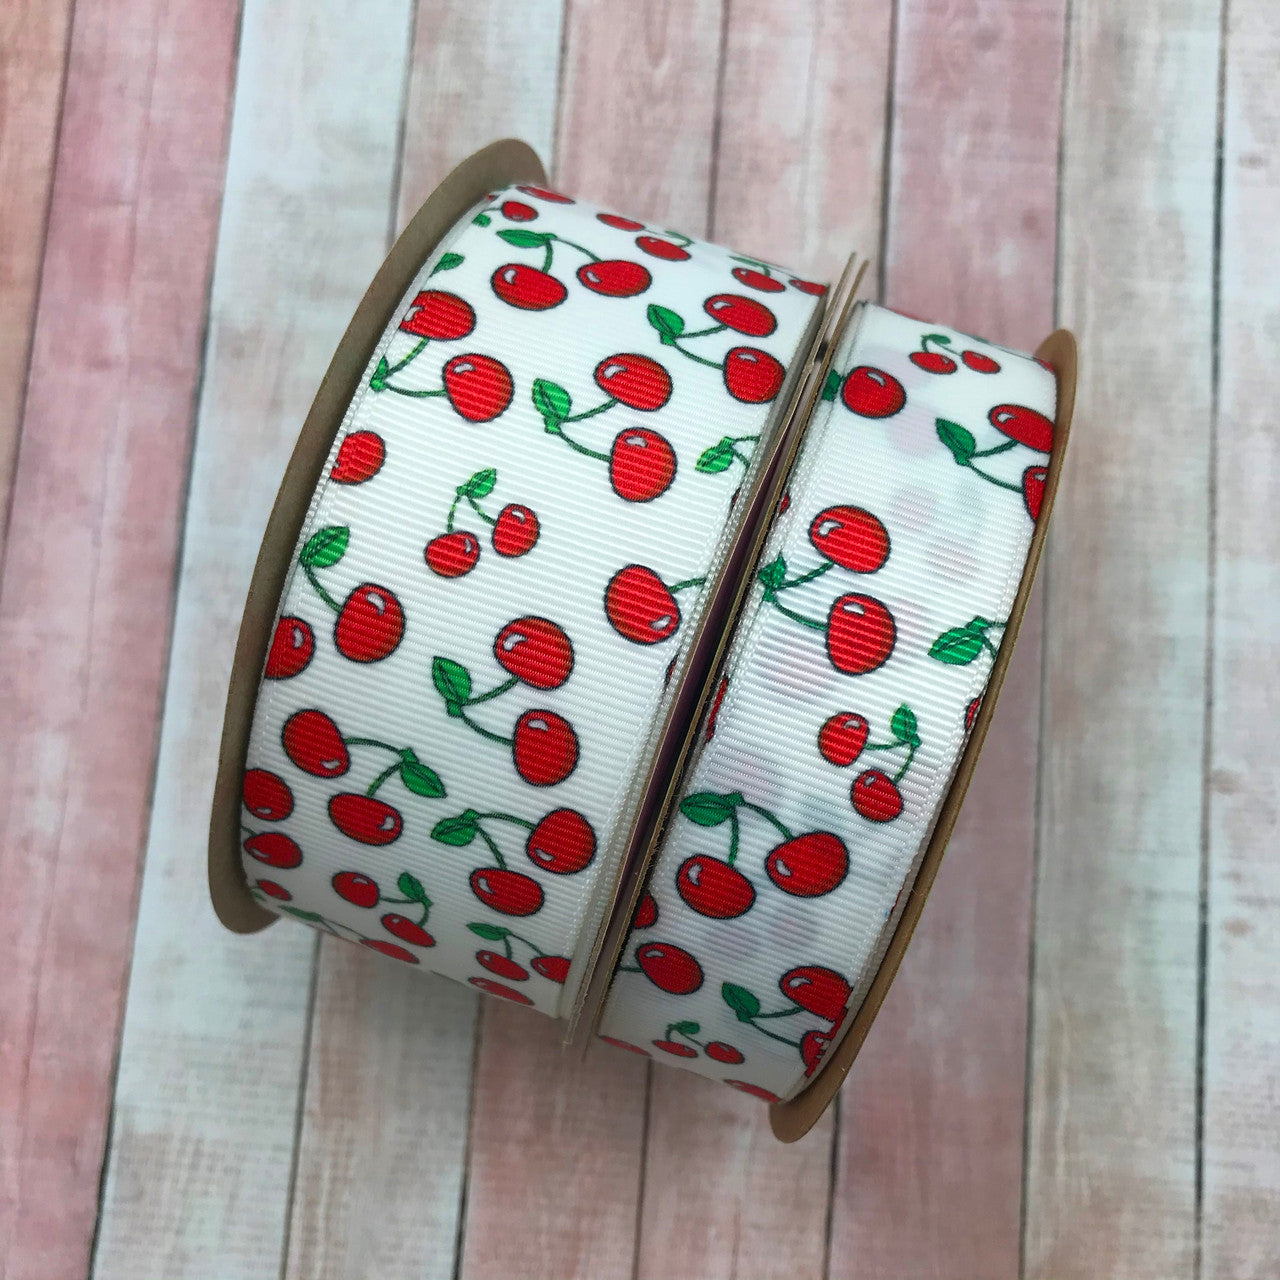 Our Cherries  ribbon comes in two sizes on white grosgrain! We have 1.5" and 7/8" for larger and smaller projects!